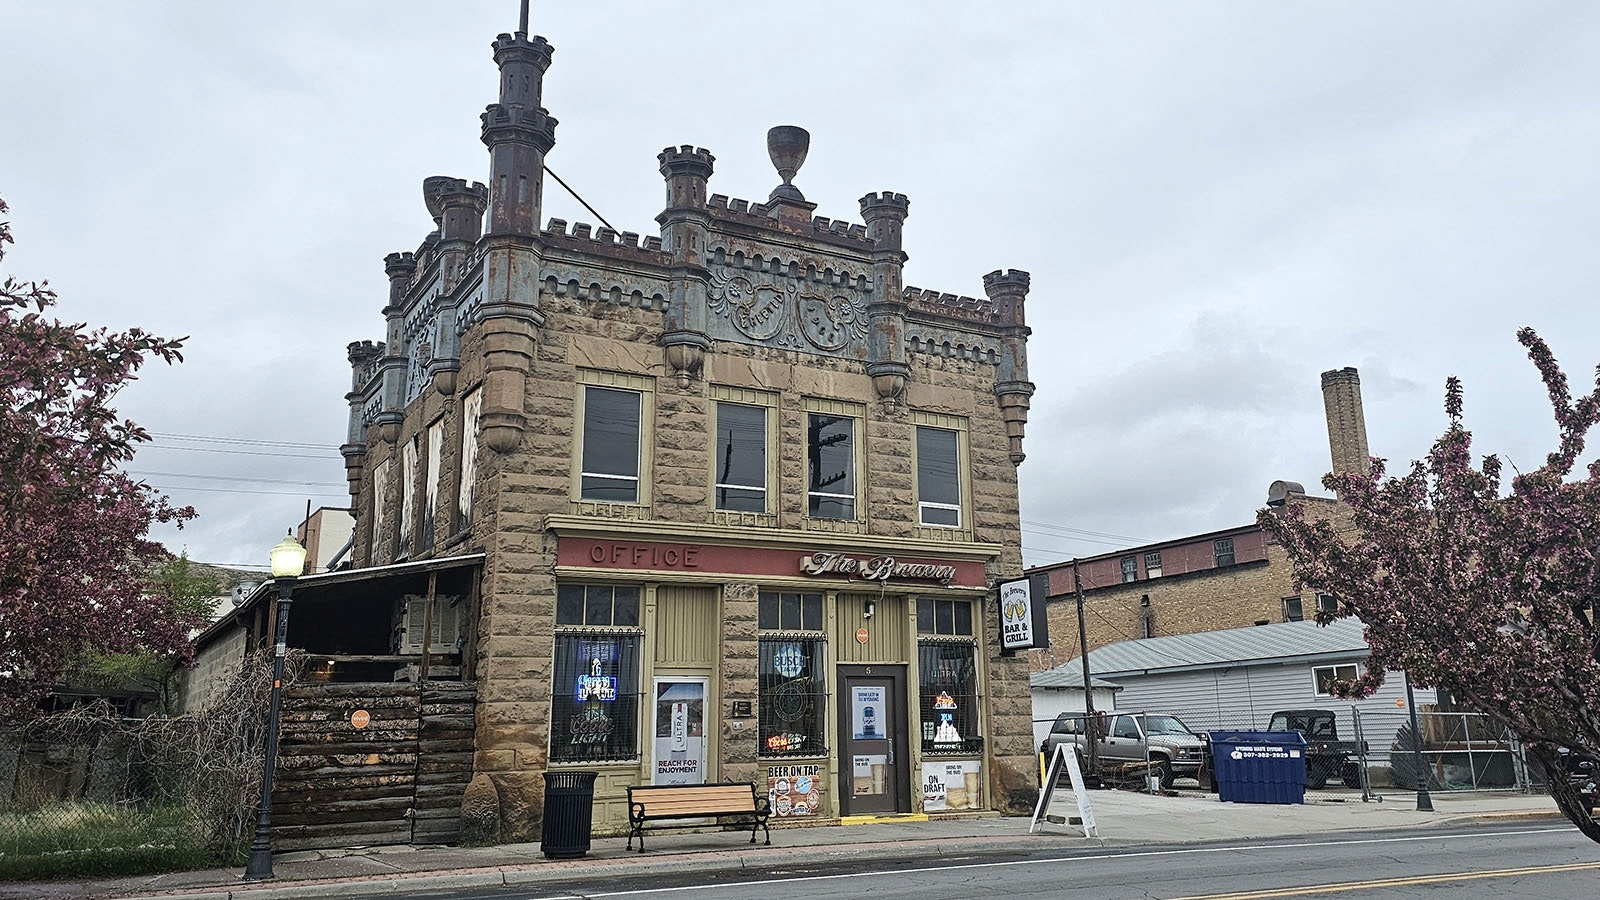 The Brewery in Green River is one of three buildings that used to comprise the Sweetwater Brewery that once made the "beer that made Milwaukee jealous."